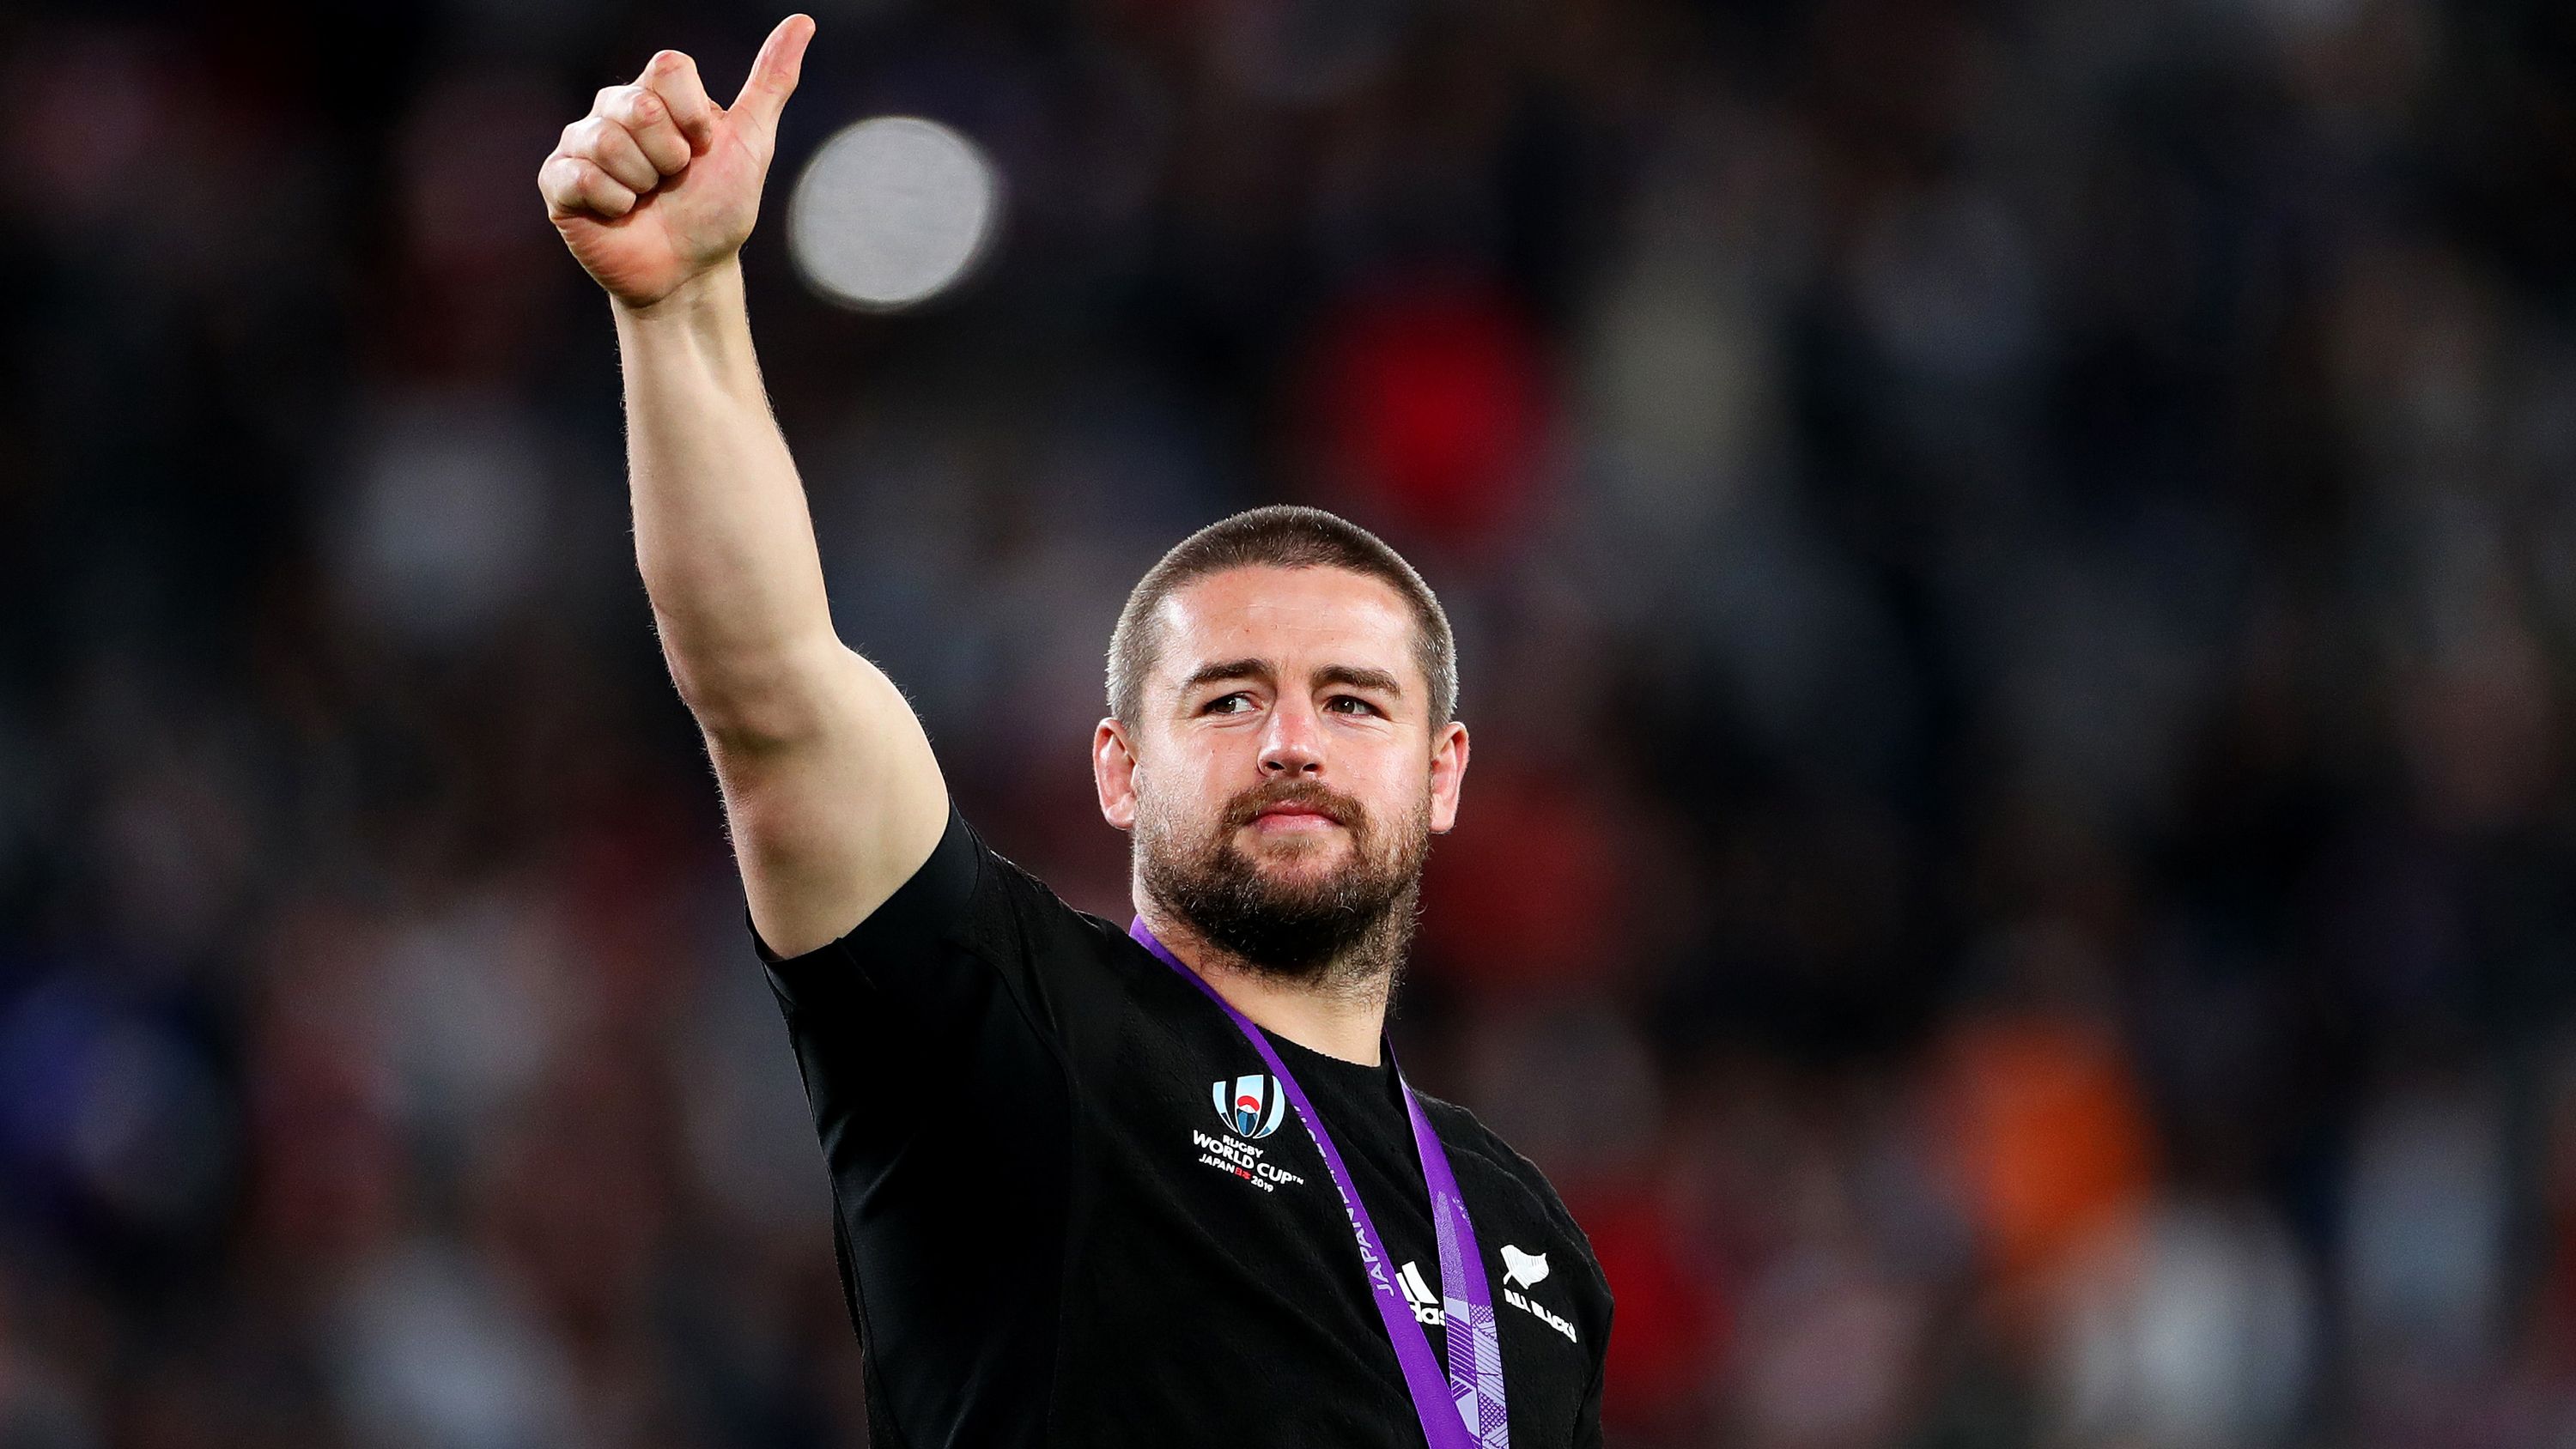 Dane Coles acknowledges fans with his bronze medal after the 2019 Rugby World Cup bronze final match between New Zealand and Wales.